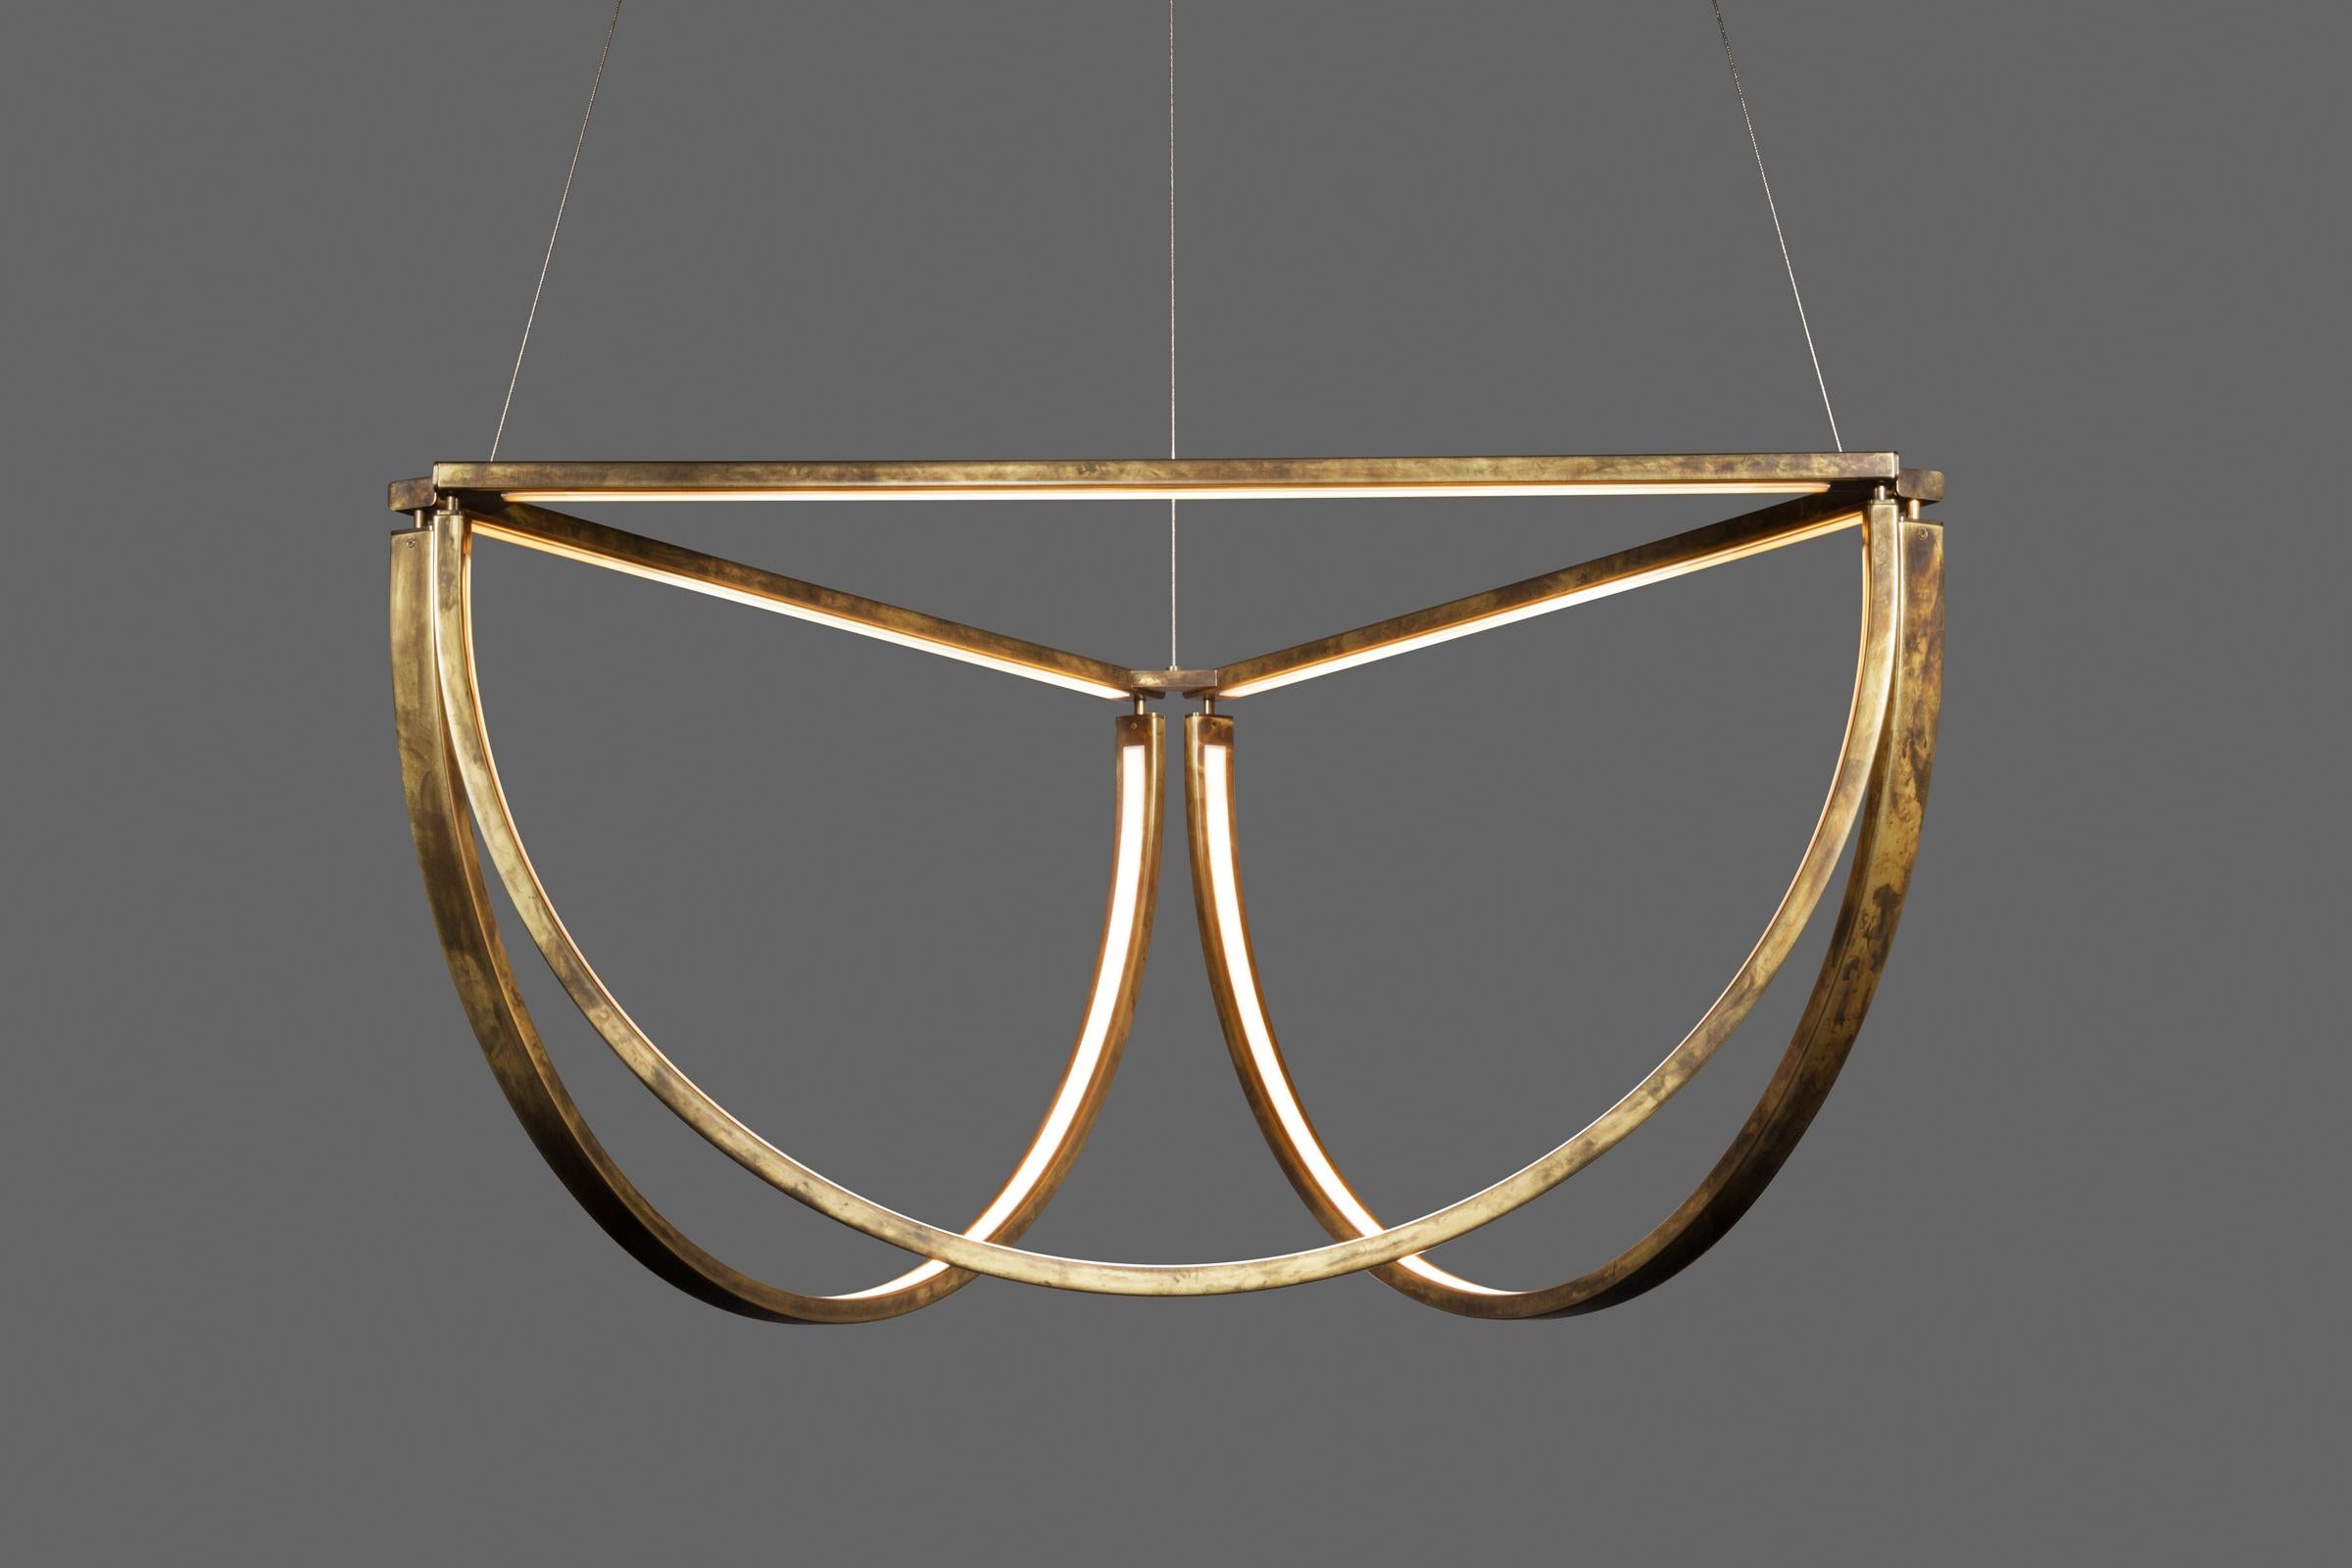 The Chord Cluster, the latest member of the Chord Collection, is a modern reinterpretation of the first Chord pendant. When grouped together, the semi-circles are reminiscent of the bowed curves of a traditional crystal chandelier. Like its